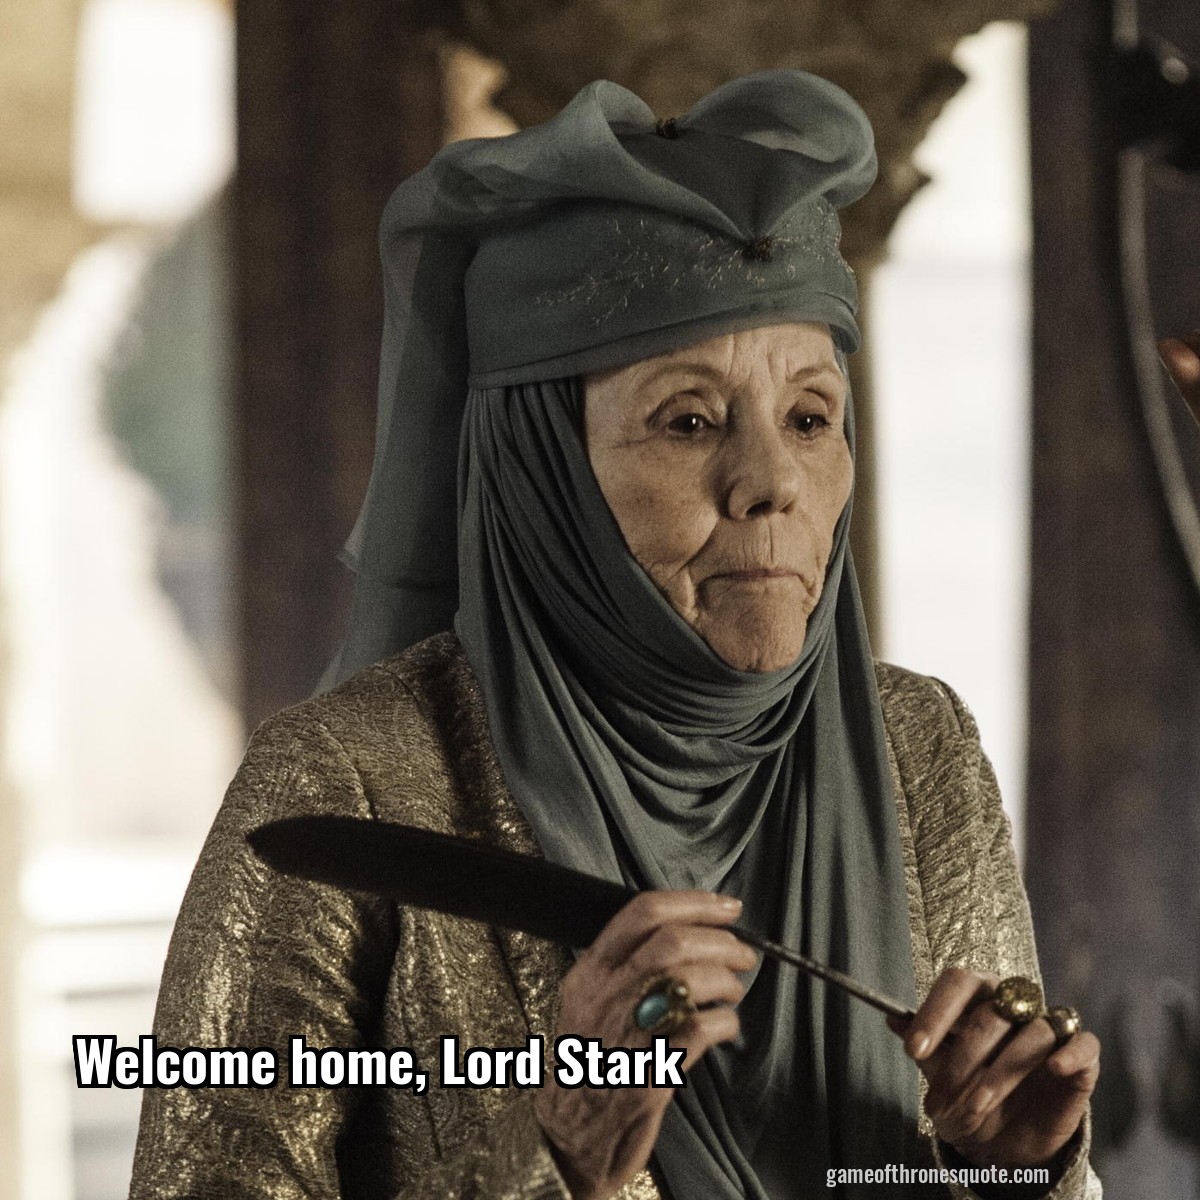 Welcome home, Lord Stark